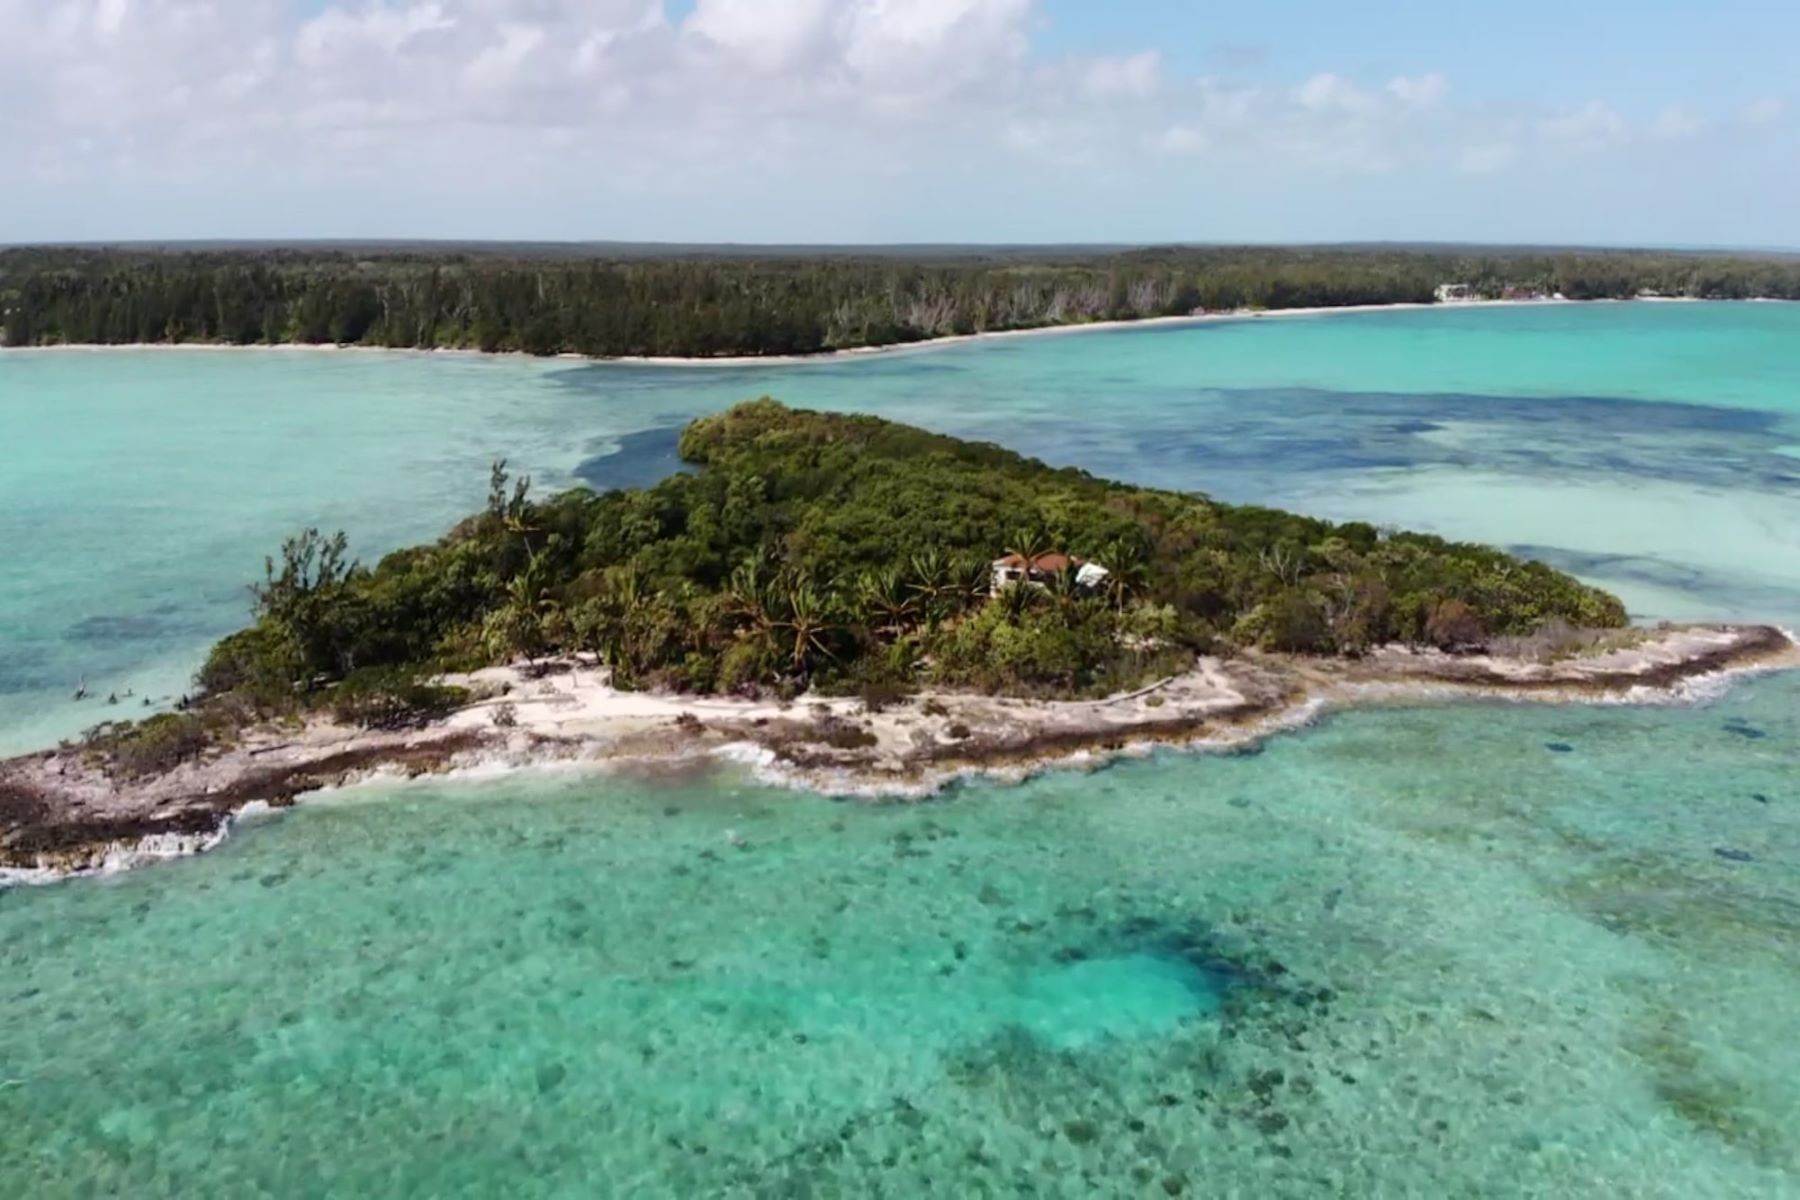 1. Private Islands for Sale at Swain's Cay, Private Island off Andros Mangrove Cay, Andros, Bahamas